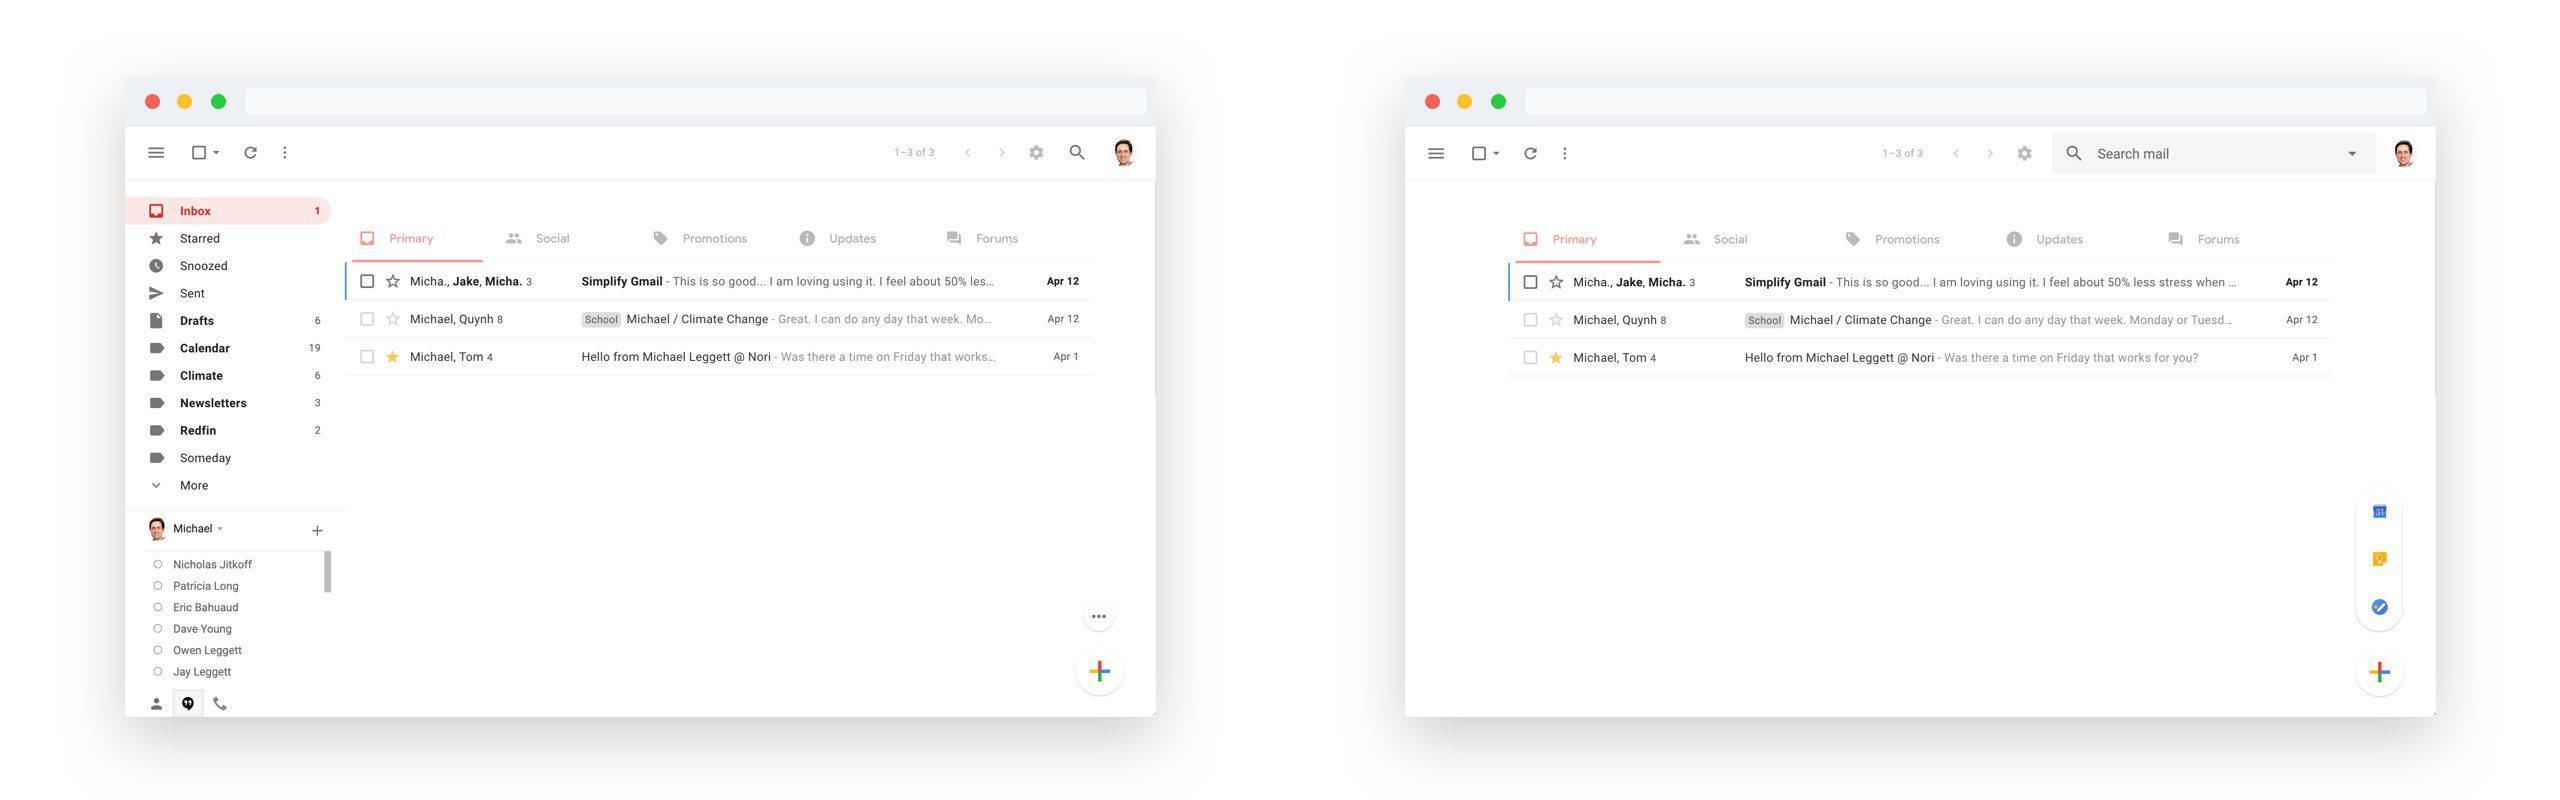 Cluttered Gmail interface vs Neat Interface Simplify